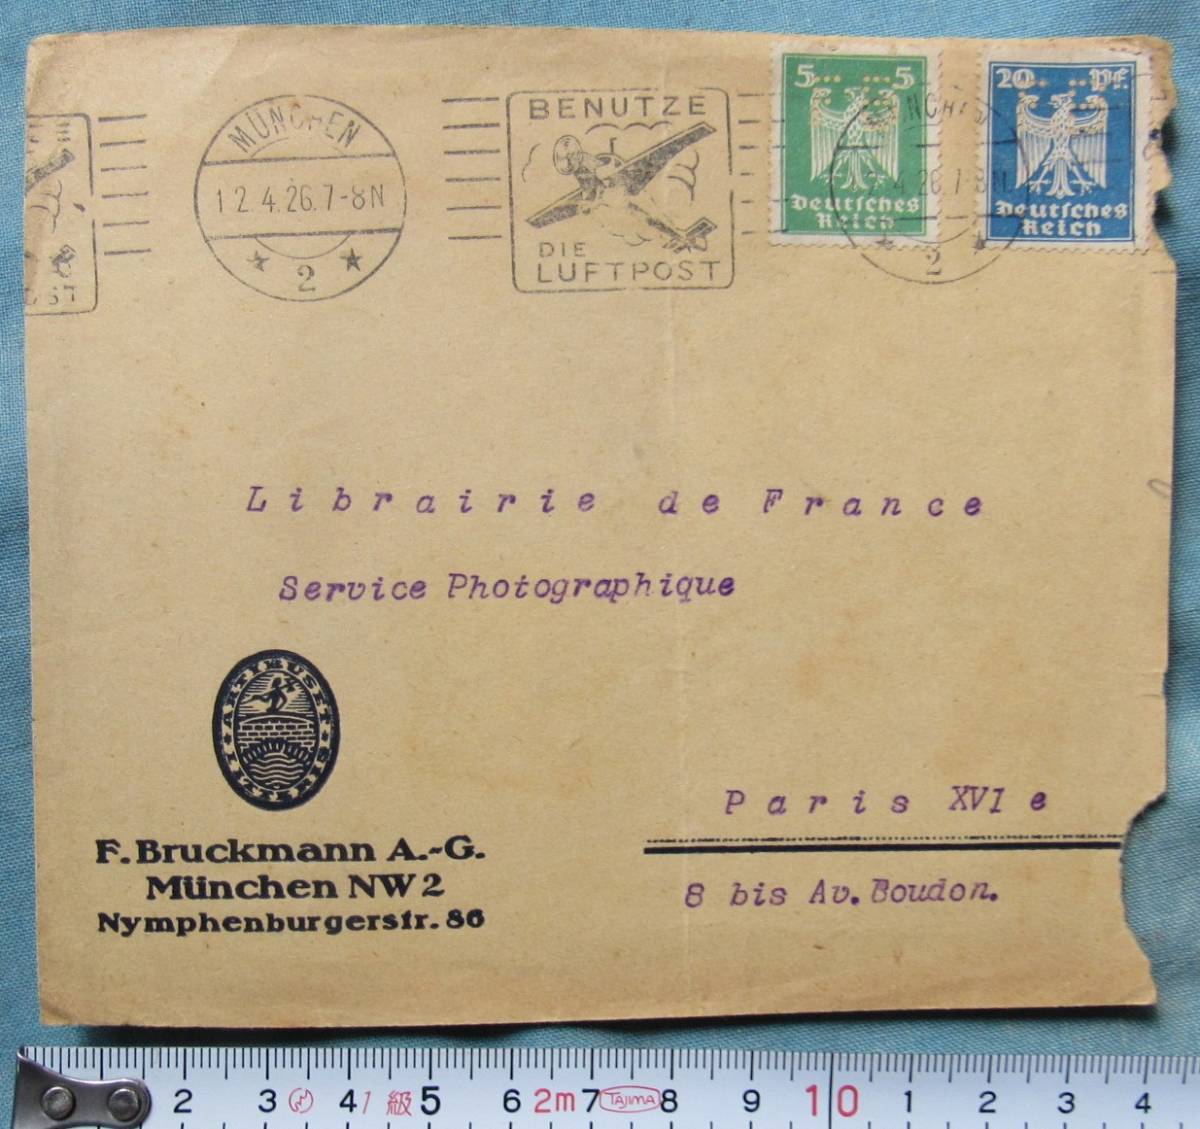 J44, old Germany. entire, mail materials, Wilhelm, no. 3. country era, envelope,. paper 10 point, letter less,. seal color .., black frame stamp etc.,1 through front 